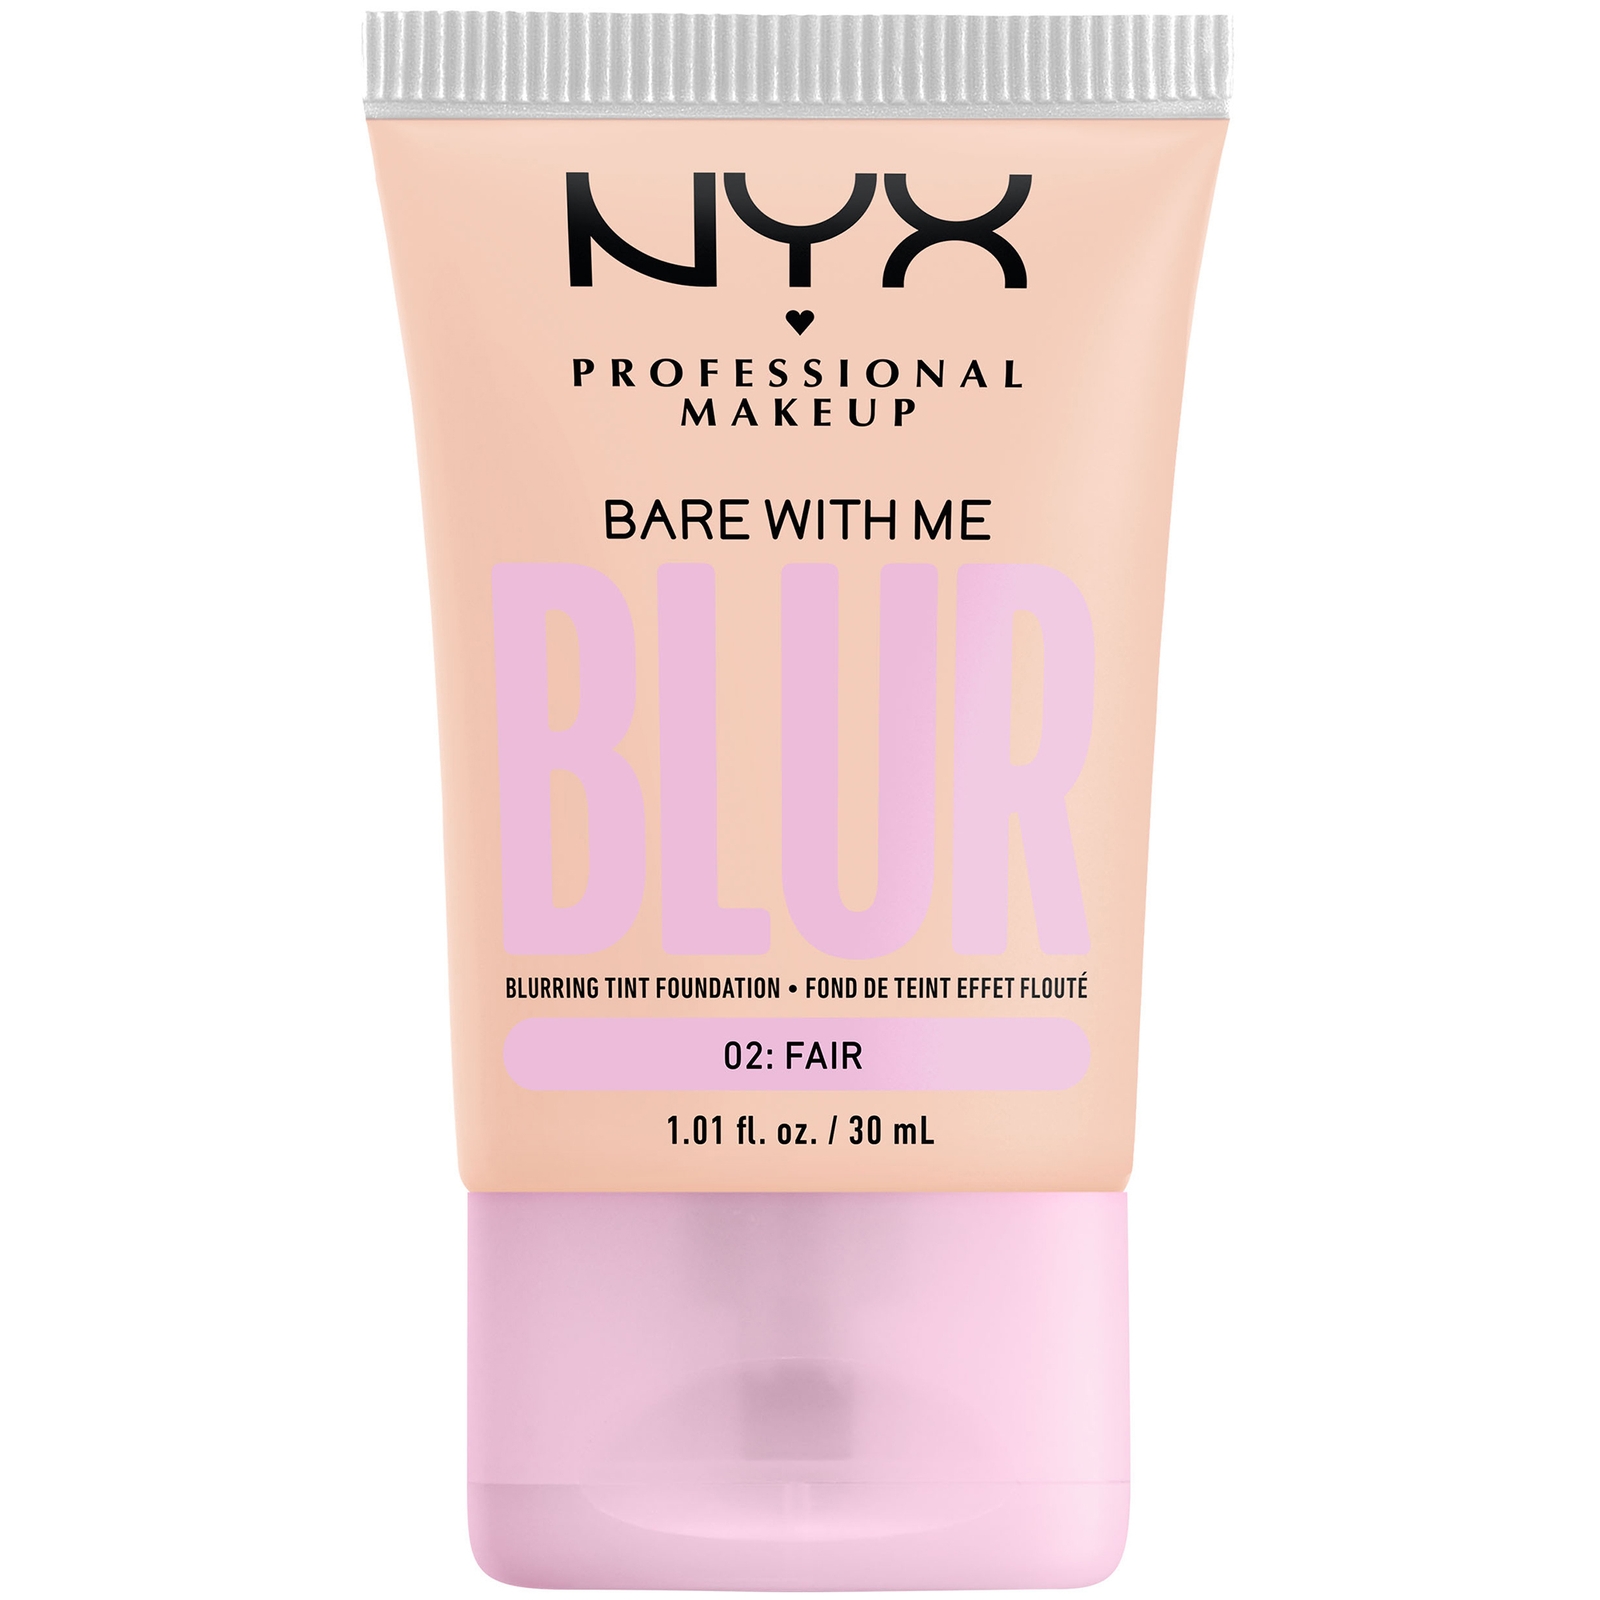 Nyx Professional Makeup Bare With Me Blur Tint Foundation 30ml (varios Shades) - Fair In White